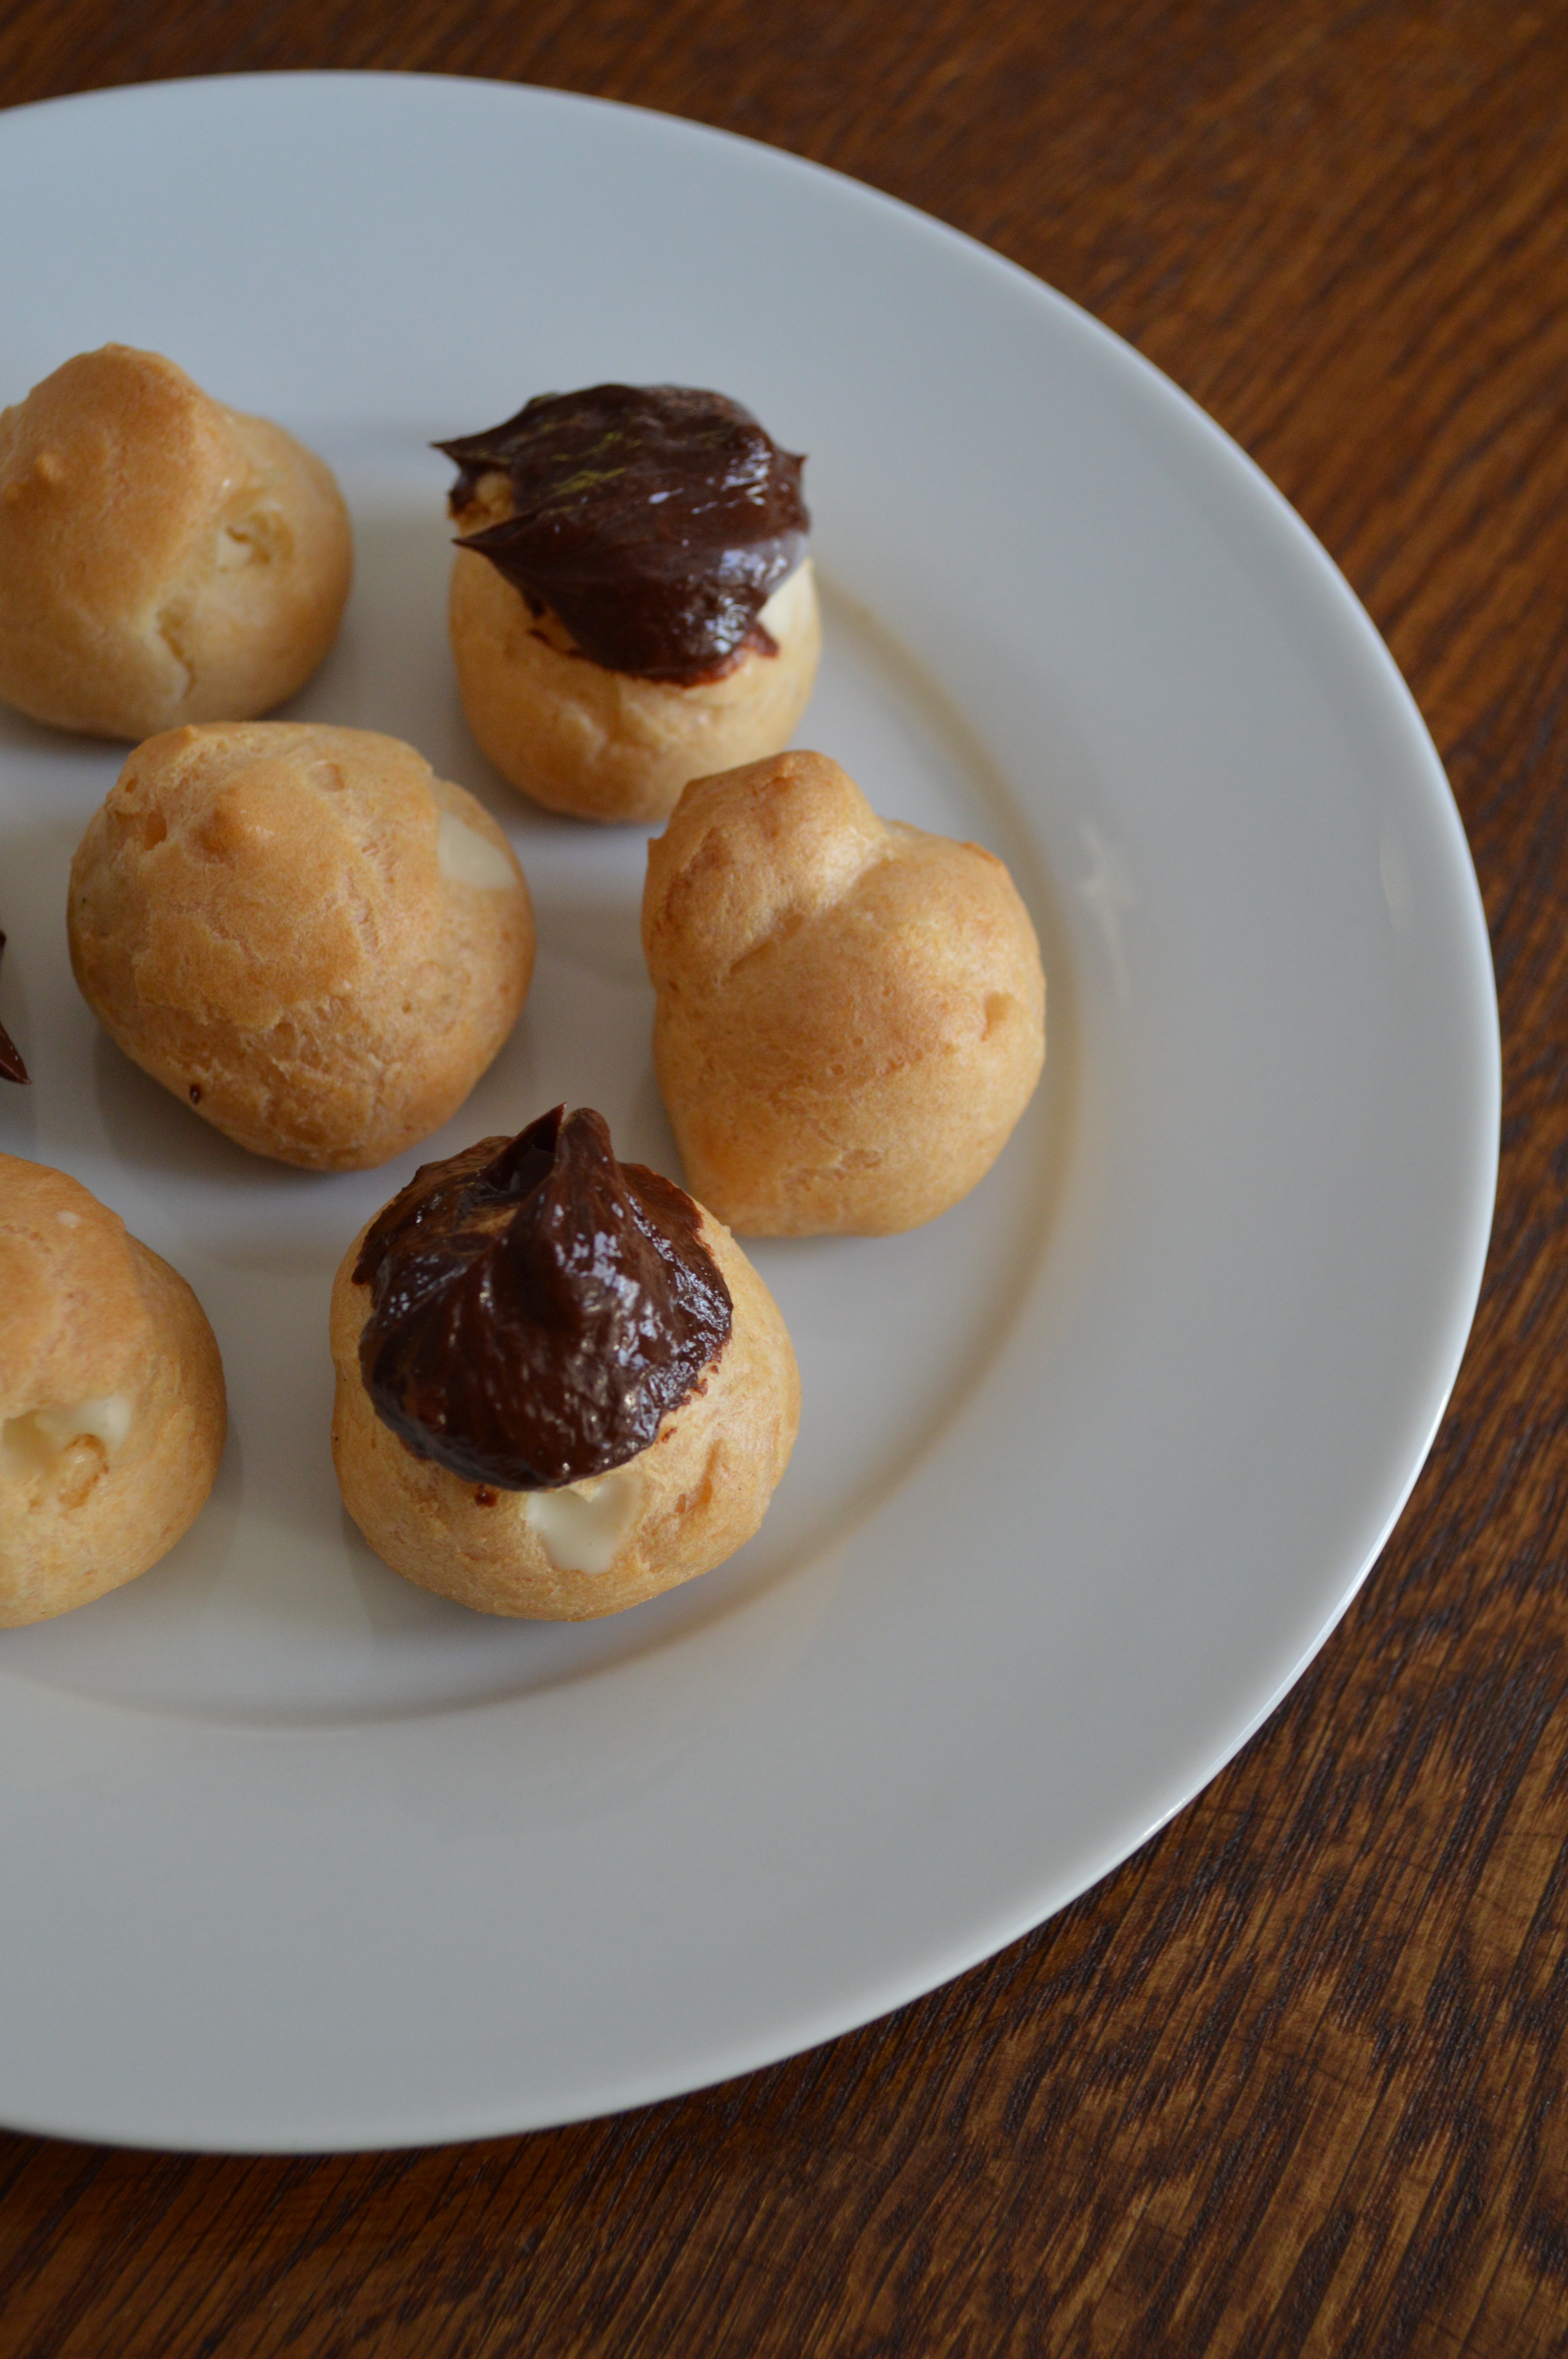 Cream puffs, some dipped in chocolate